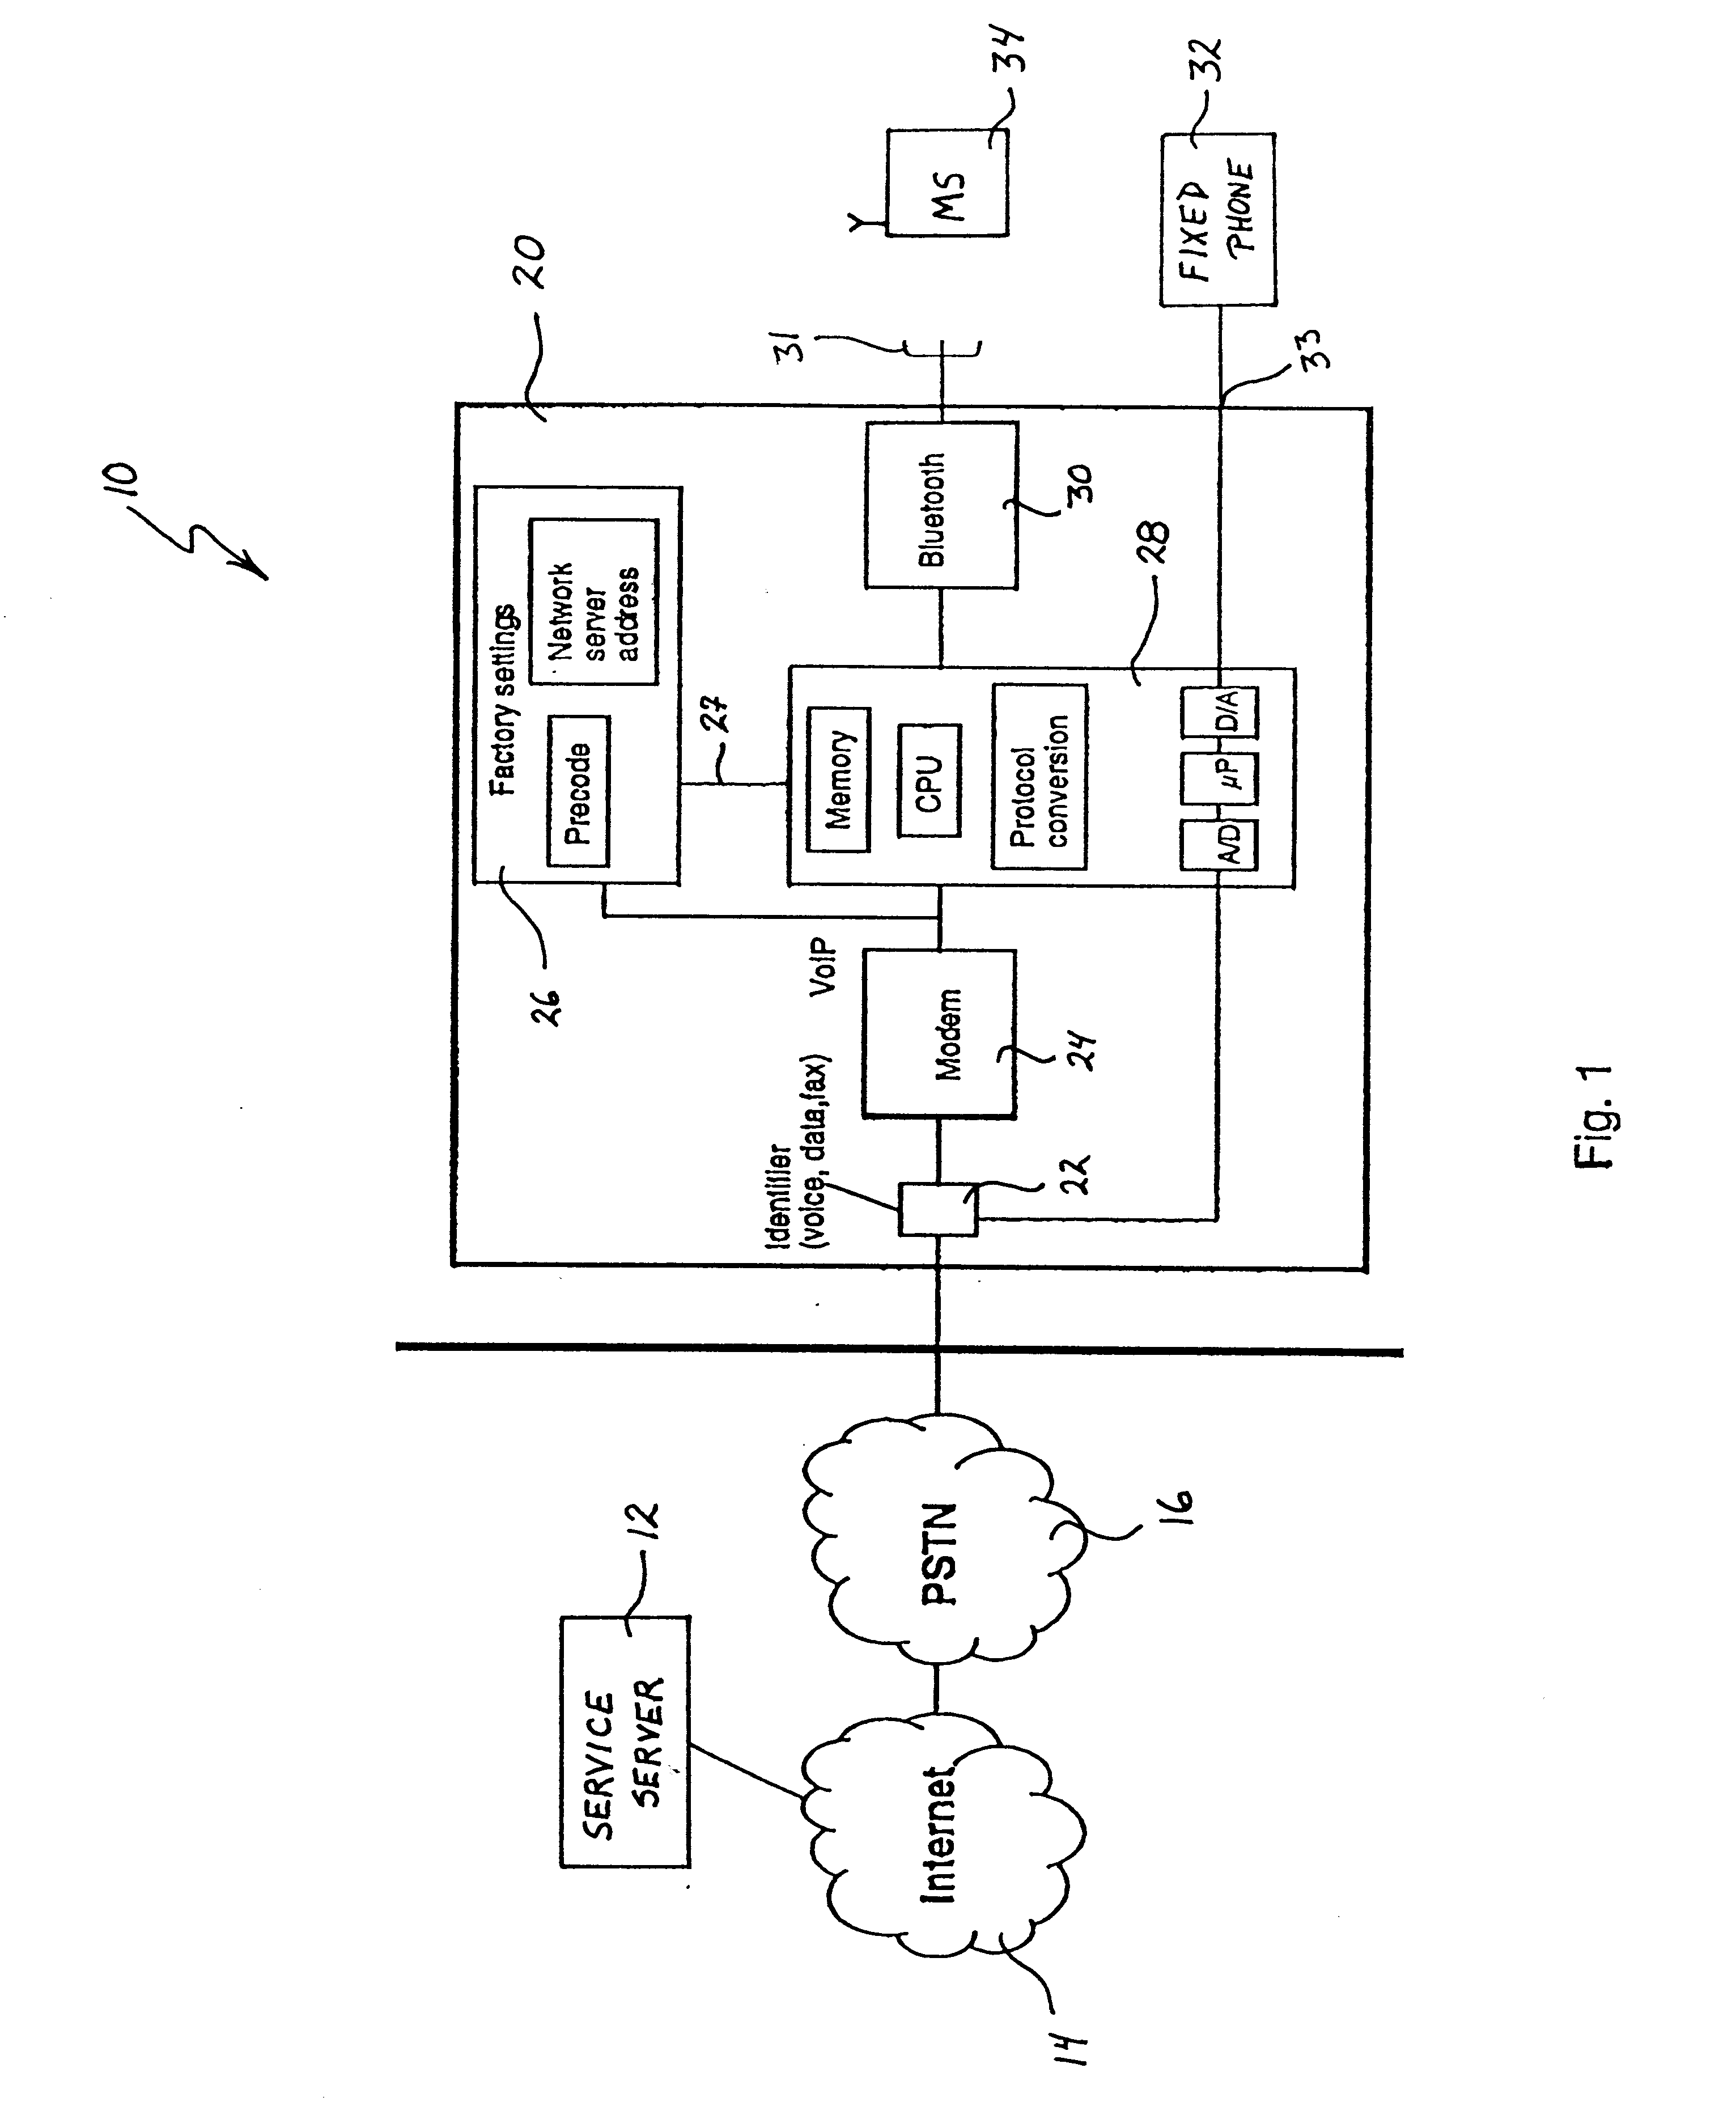 Apparatus for providing information services to a telecommunication device user